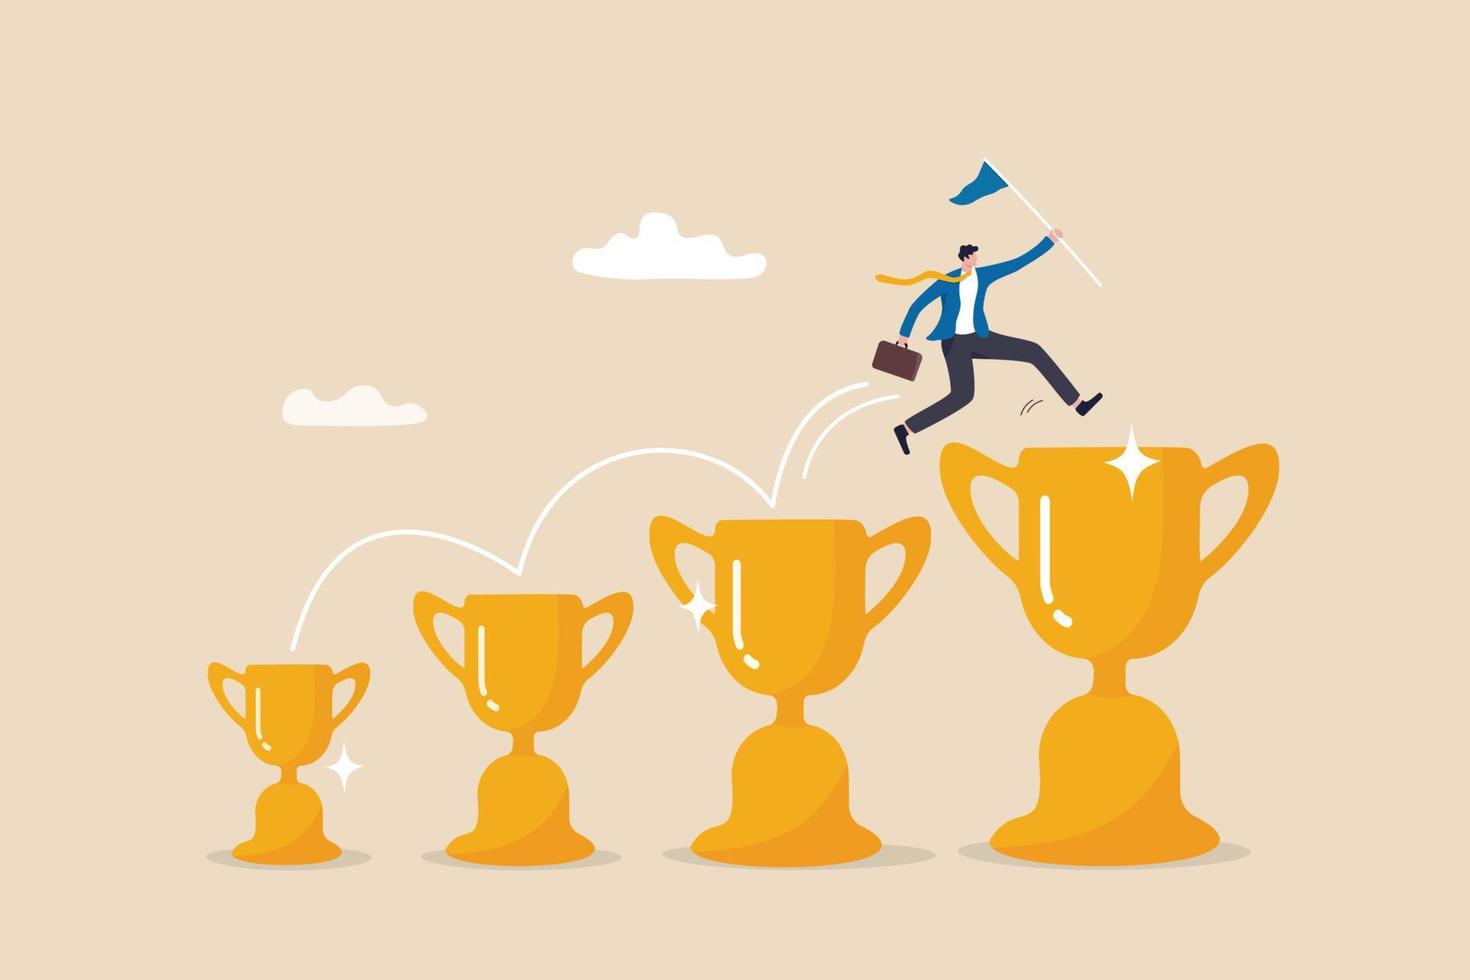 Small win or achievement to motivate to achieve bigger goal, strategy or inspiration to success, victory or win award concept, confident businessman jumping from small win trophy to get bigger one. vector